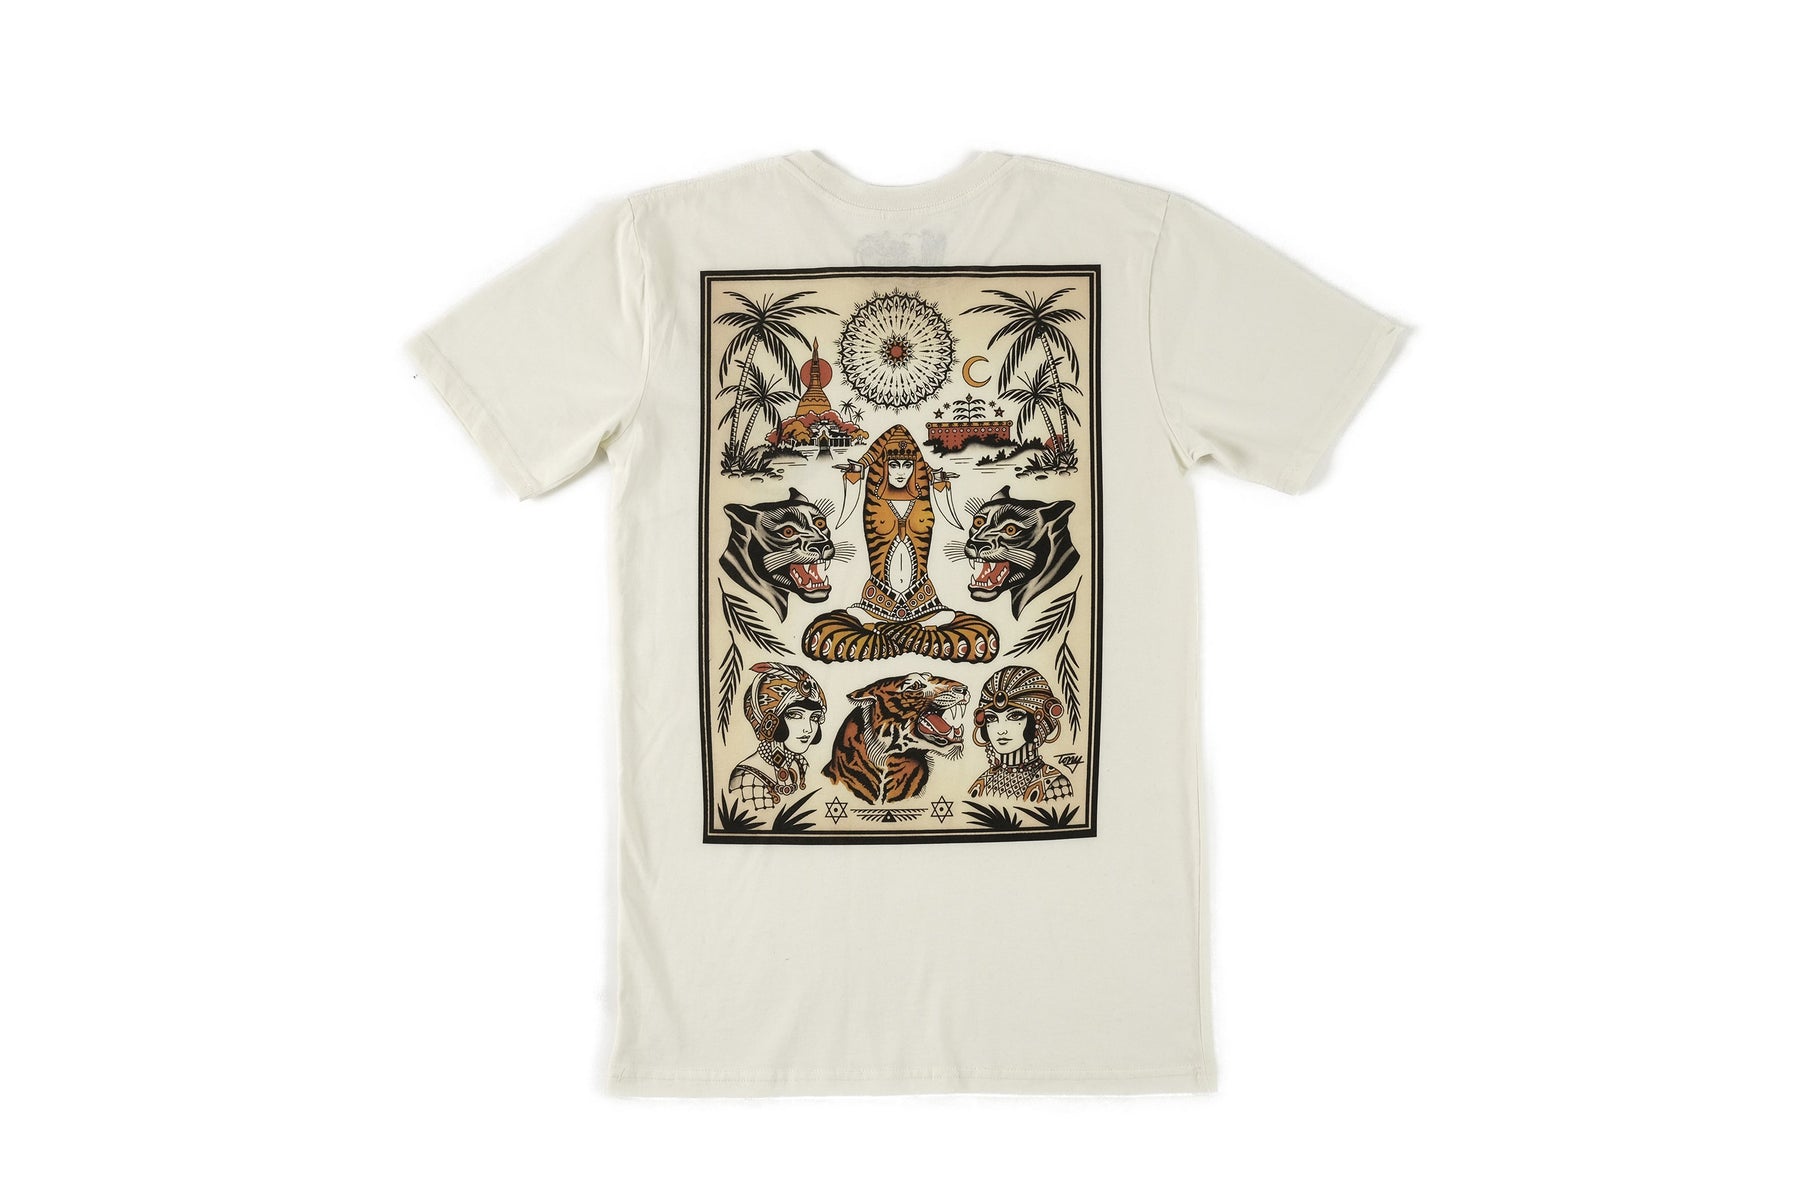 Tony Blue Arms Flash T-shirt | Traditional Tattoo Inspired Clothing ...